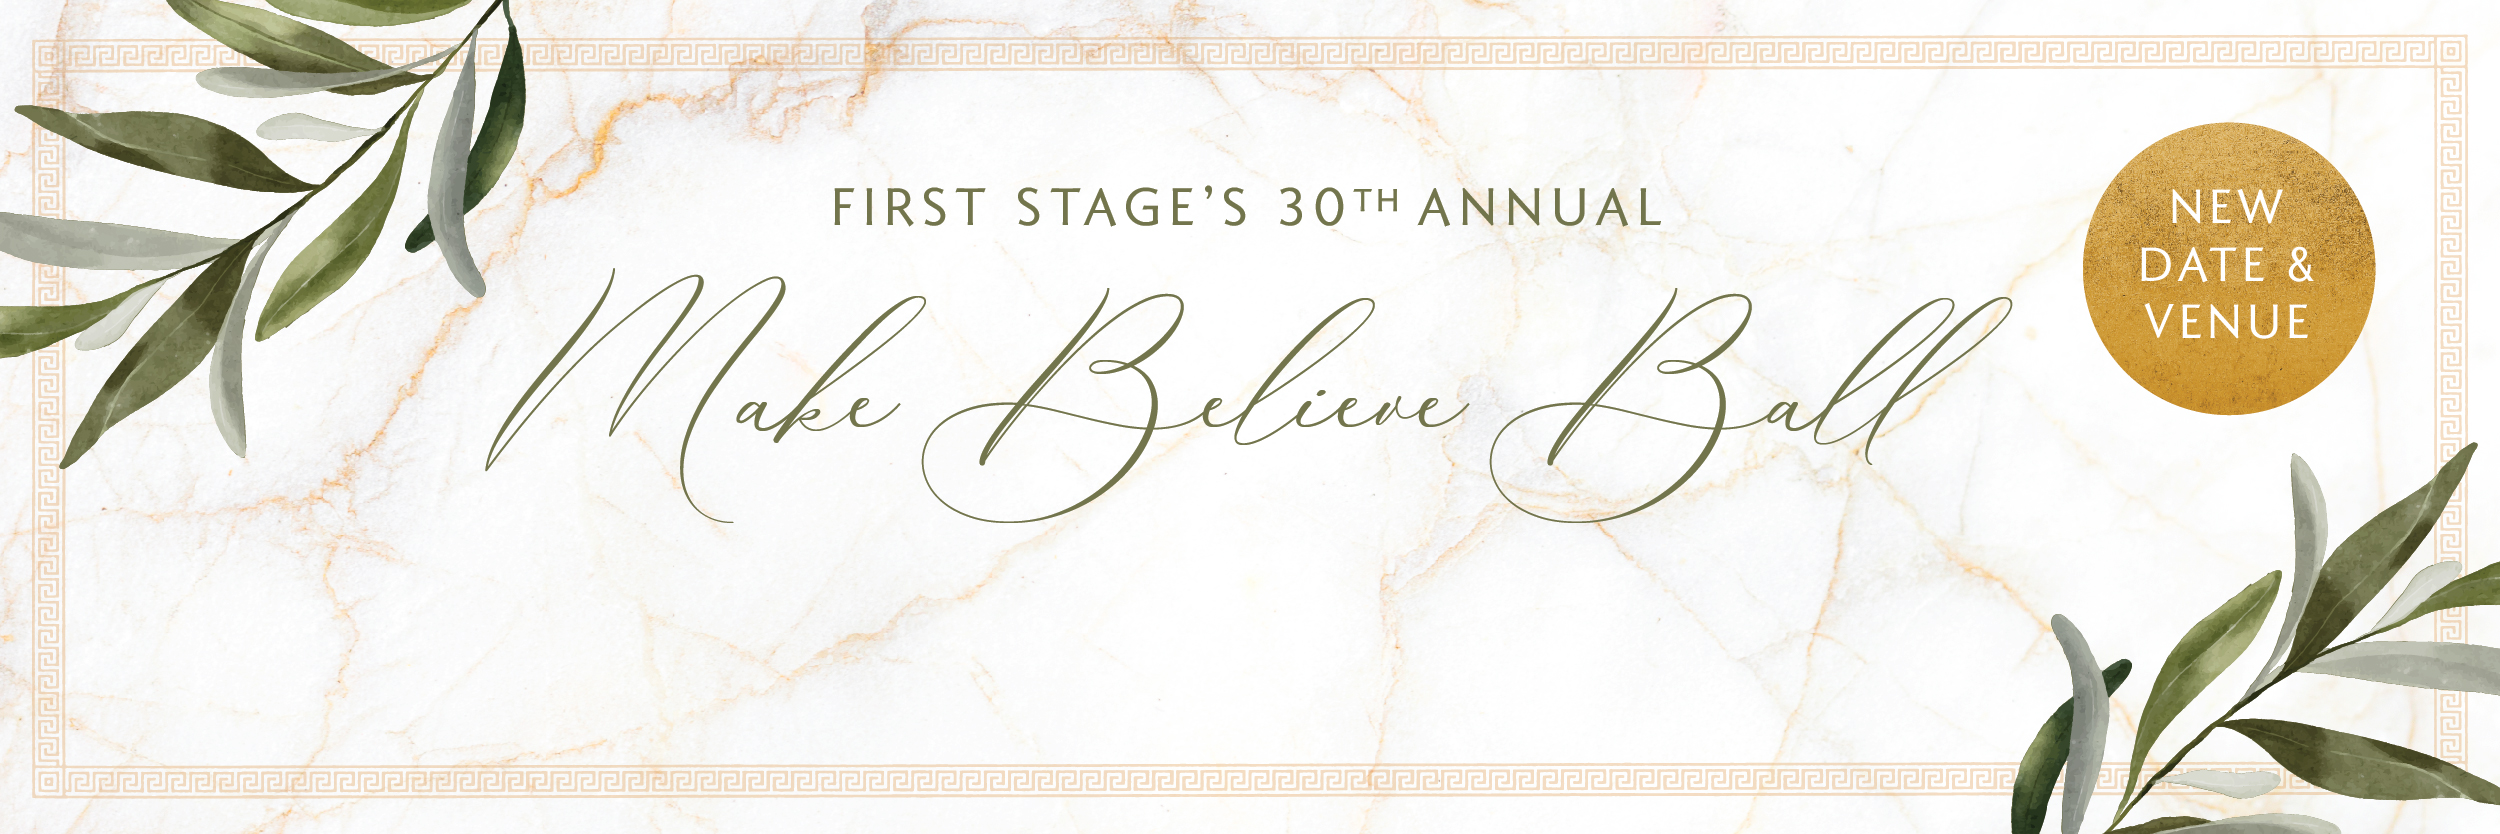 First Stage's 30th Annual Make Believe Ball